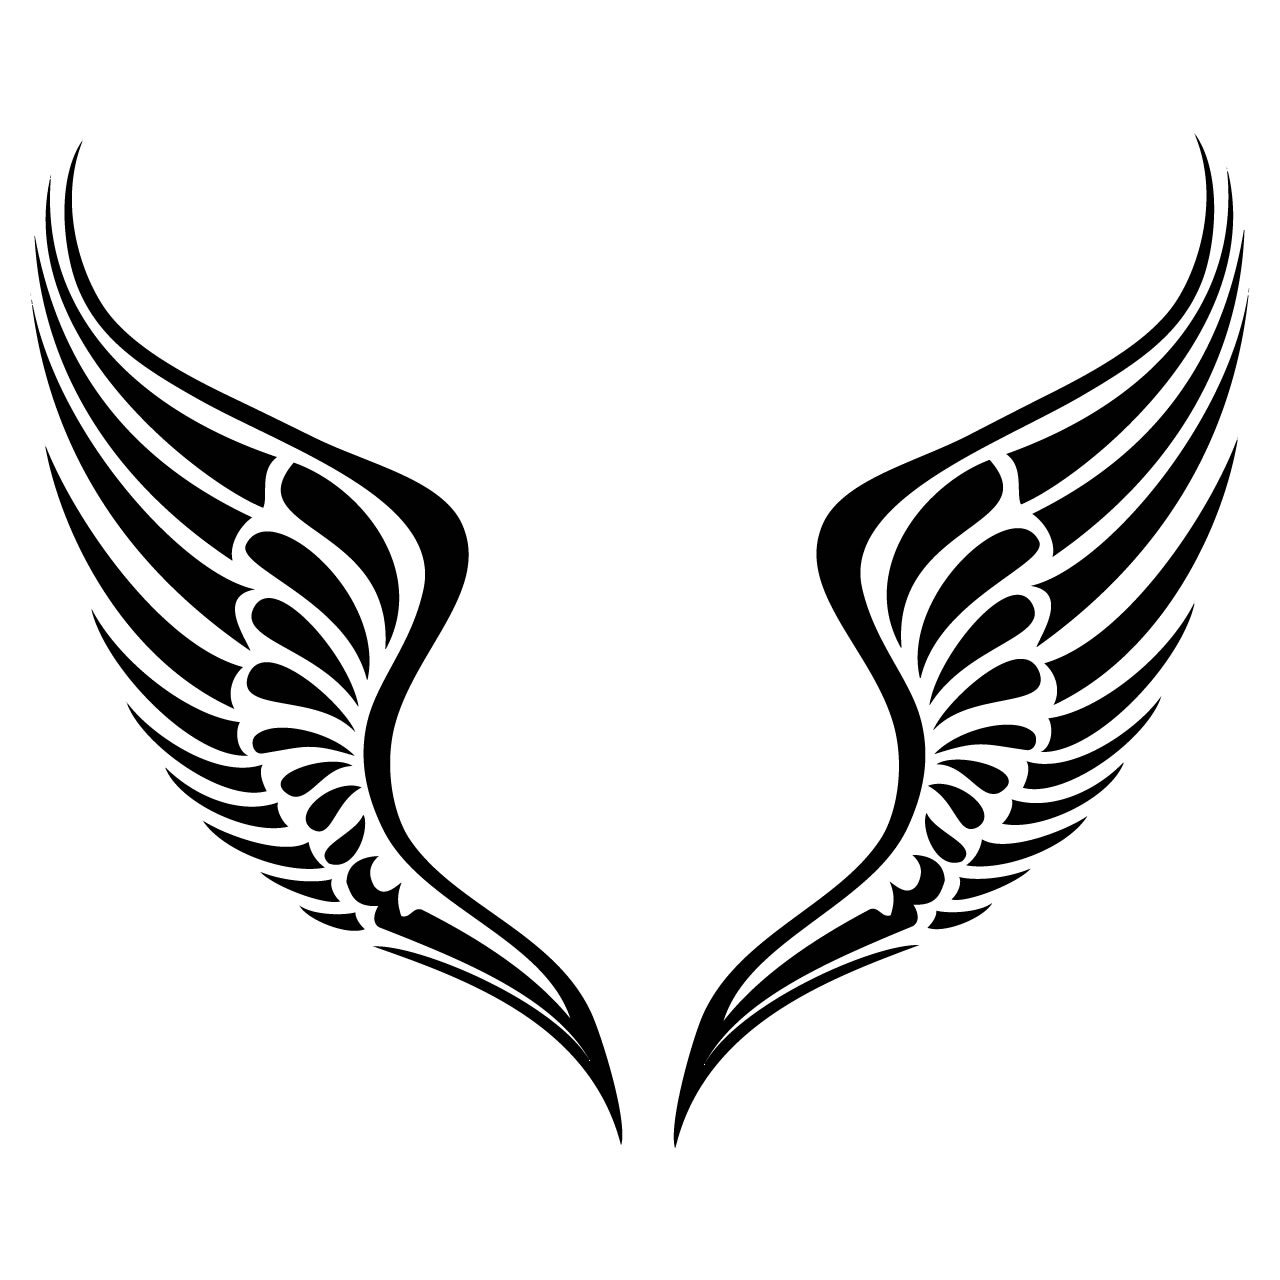 free vector clipart wings - photo #37